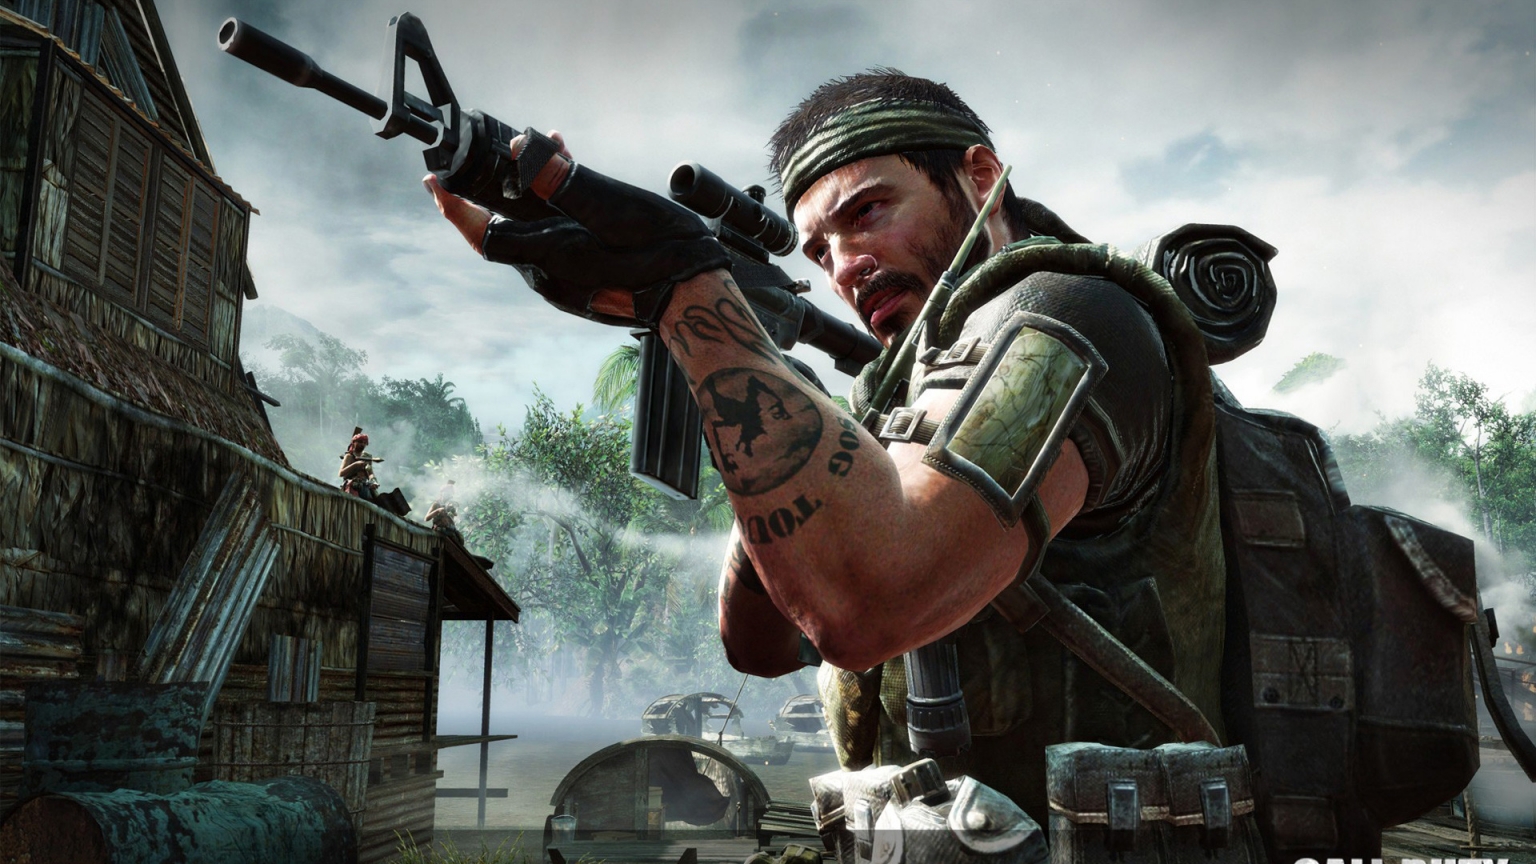 Call of Duty Black Ops Soldier for 1536 x 864 HDTV resolution